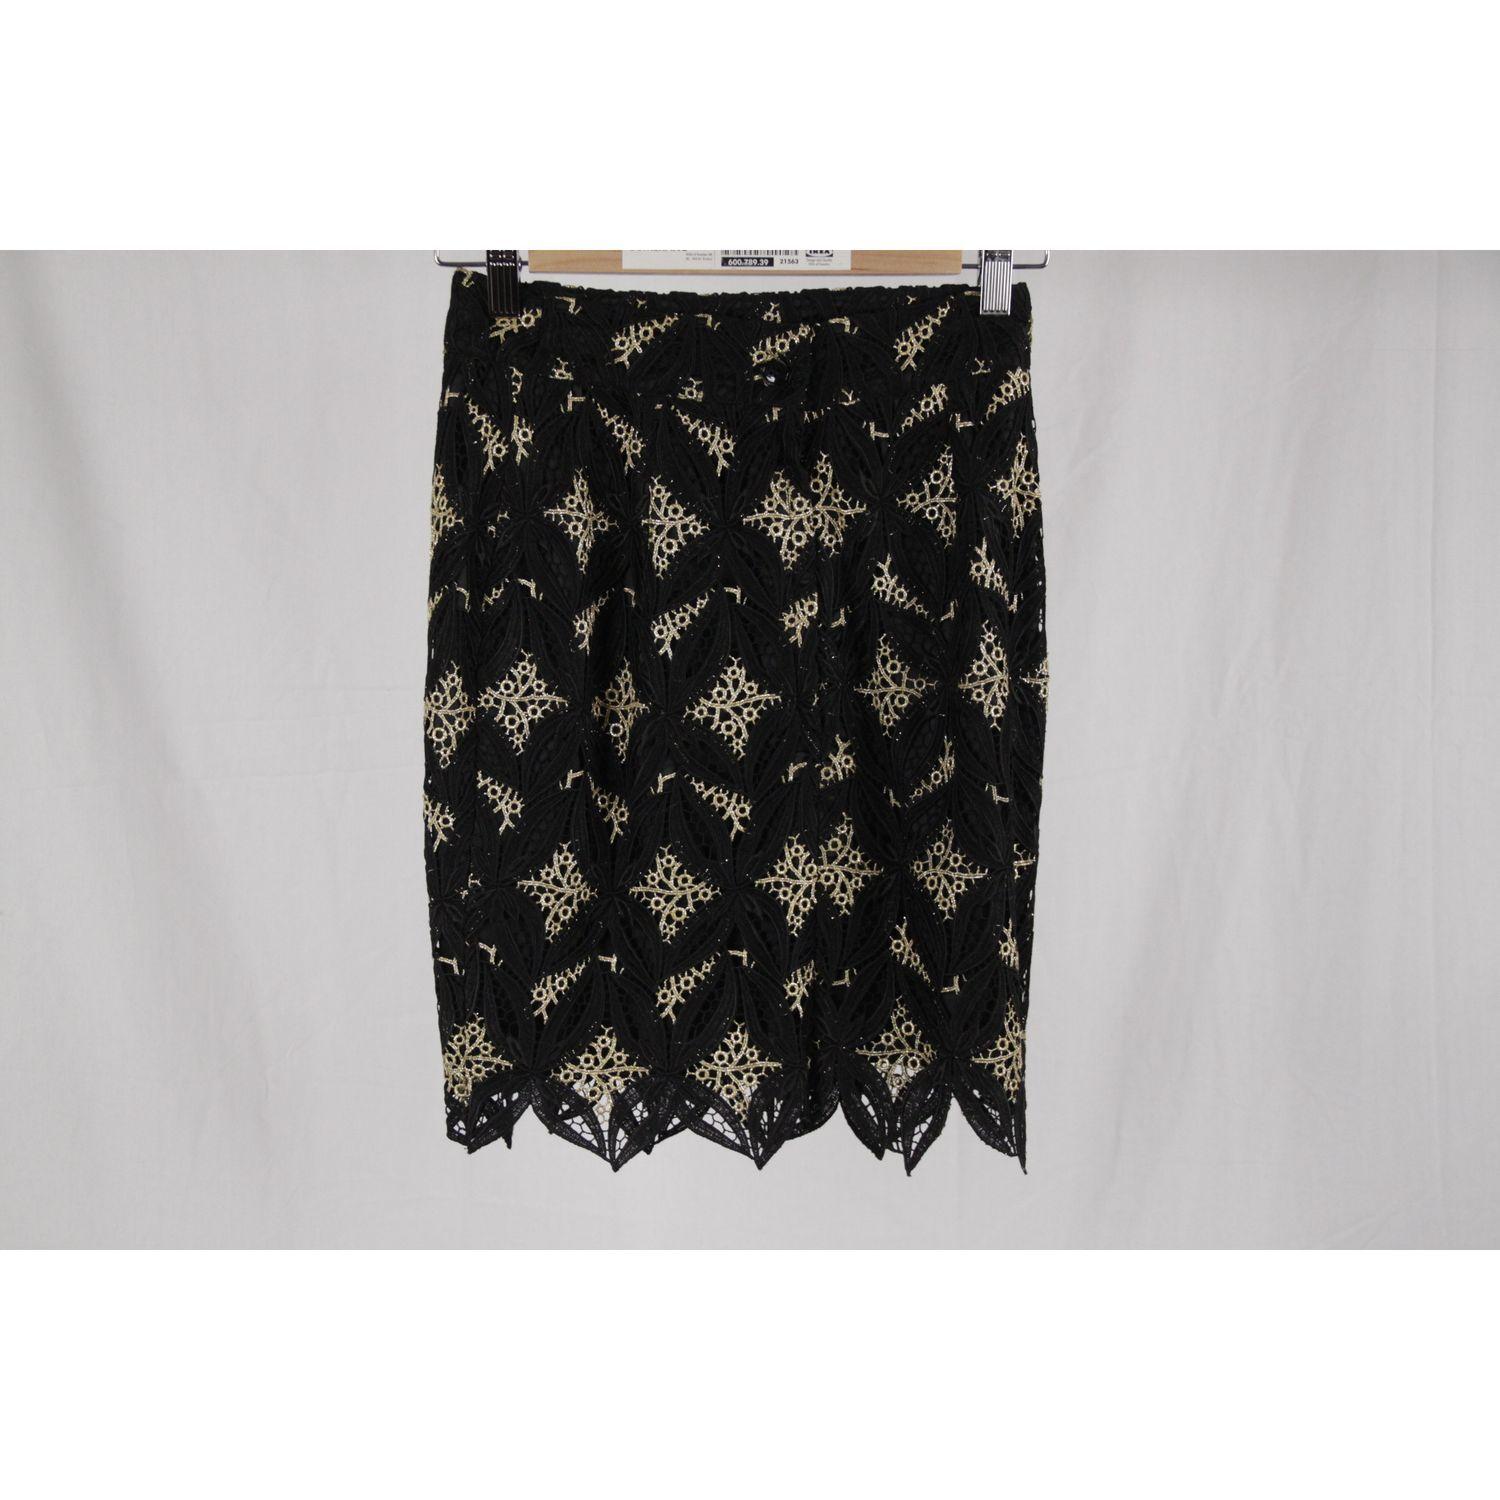 MATERIAL: Macrame COLOR: Black MODEL: Skirt GENDER: Womens SIZE: Small COUNTRY OF MANUFACTURE: Italy Condition A - EXCELLENT Previously used, but no signs of significant defects Measurements MEASUREMENTS: WAIST: TOTAL LENGTH: 19 inches - 48,2 cm